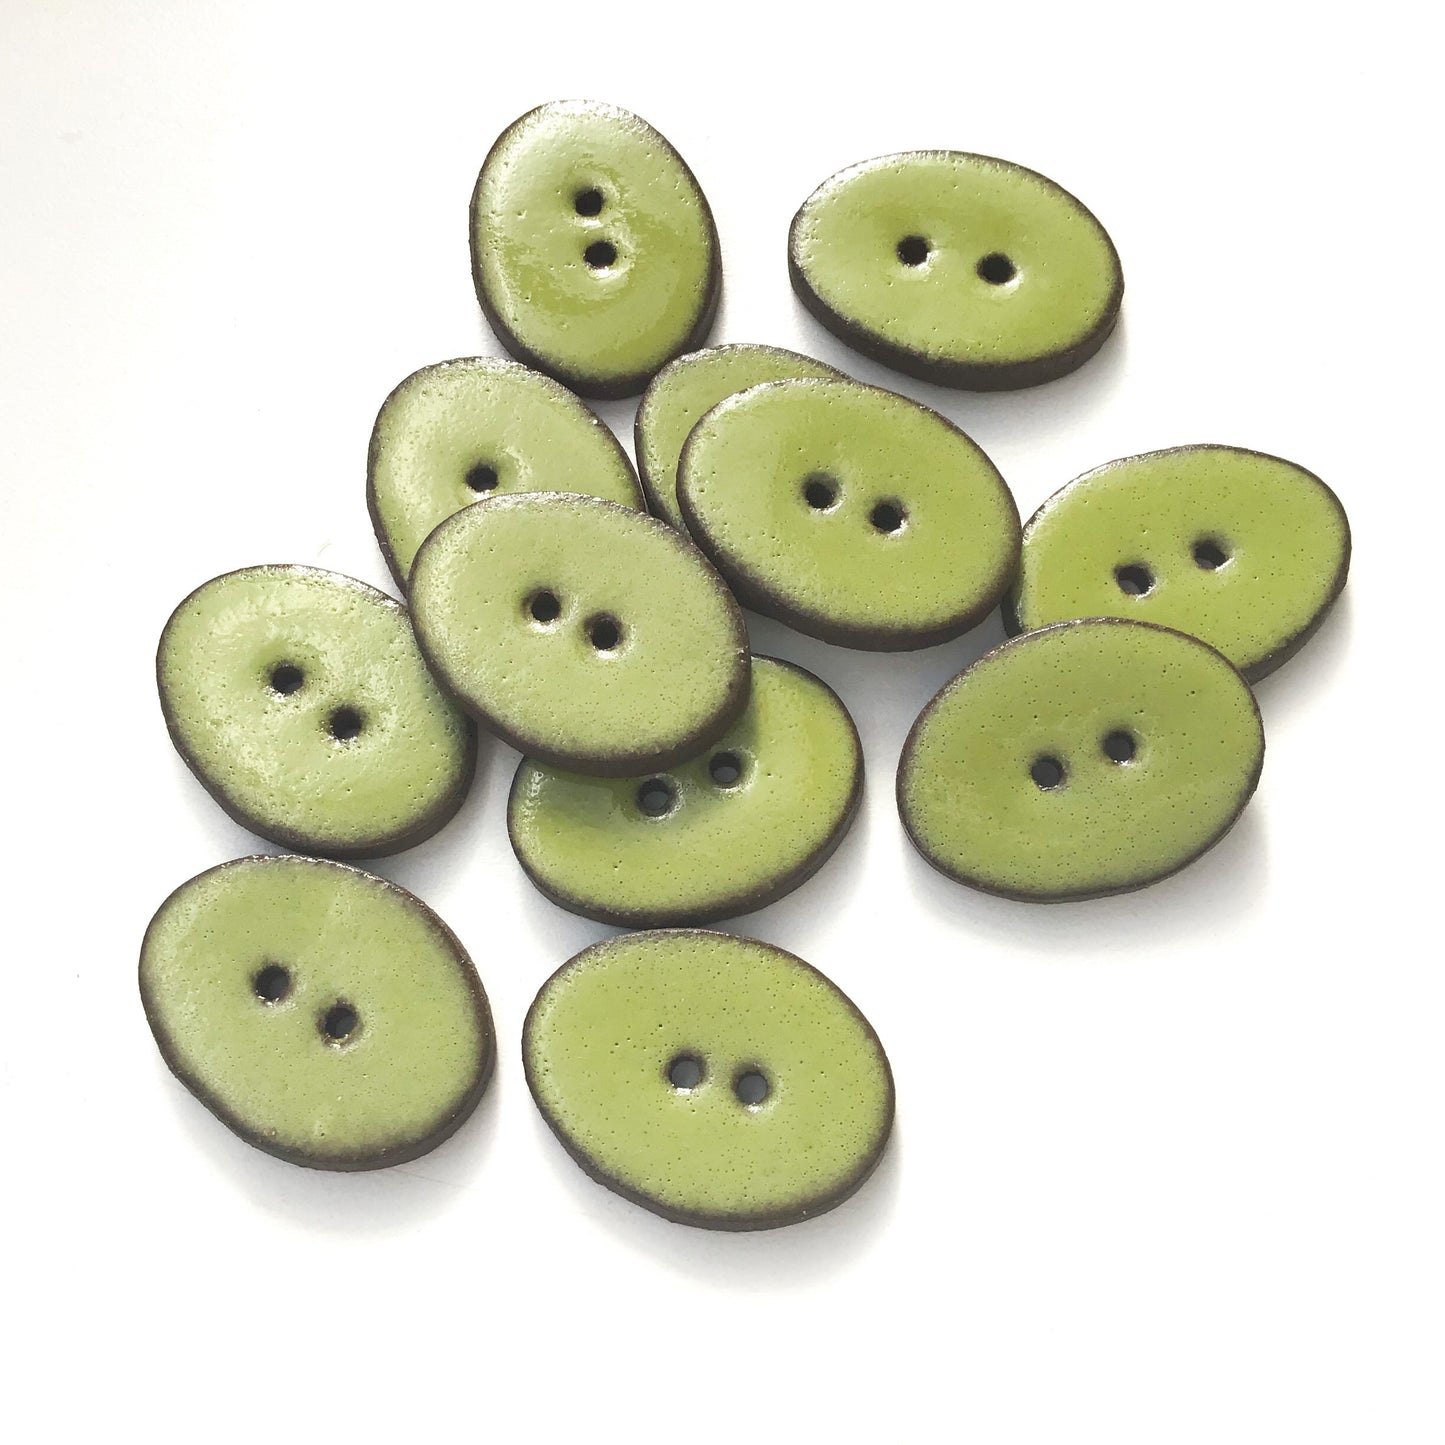 Army Green Ceramic Buttons - Oval Clay Buttons - 3/4" x 1"